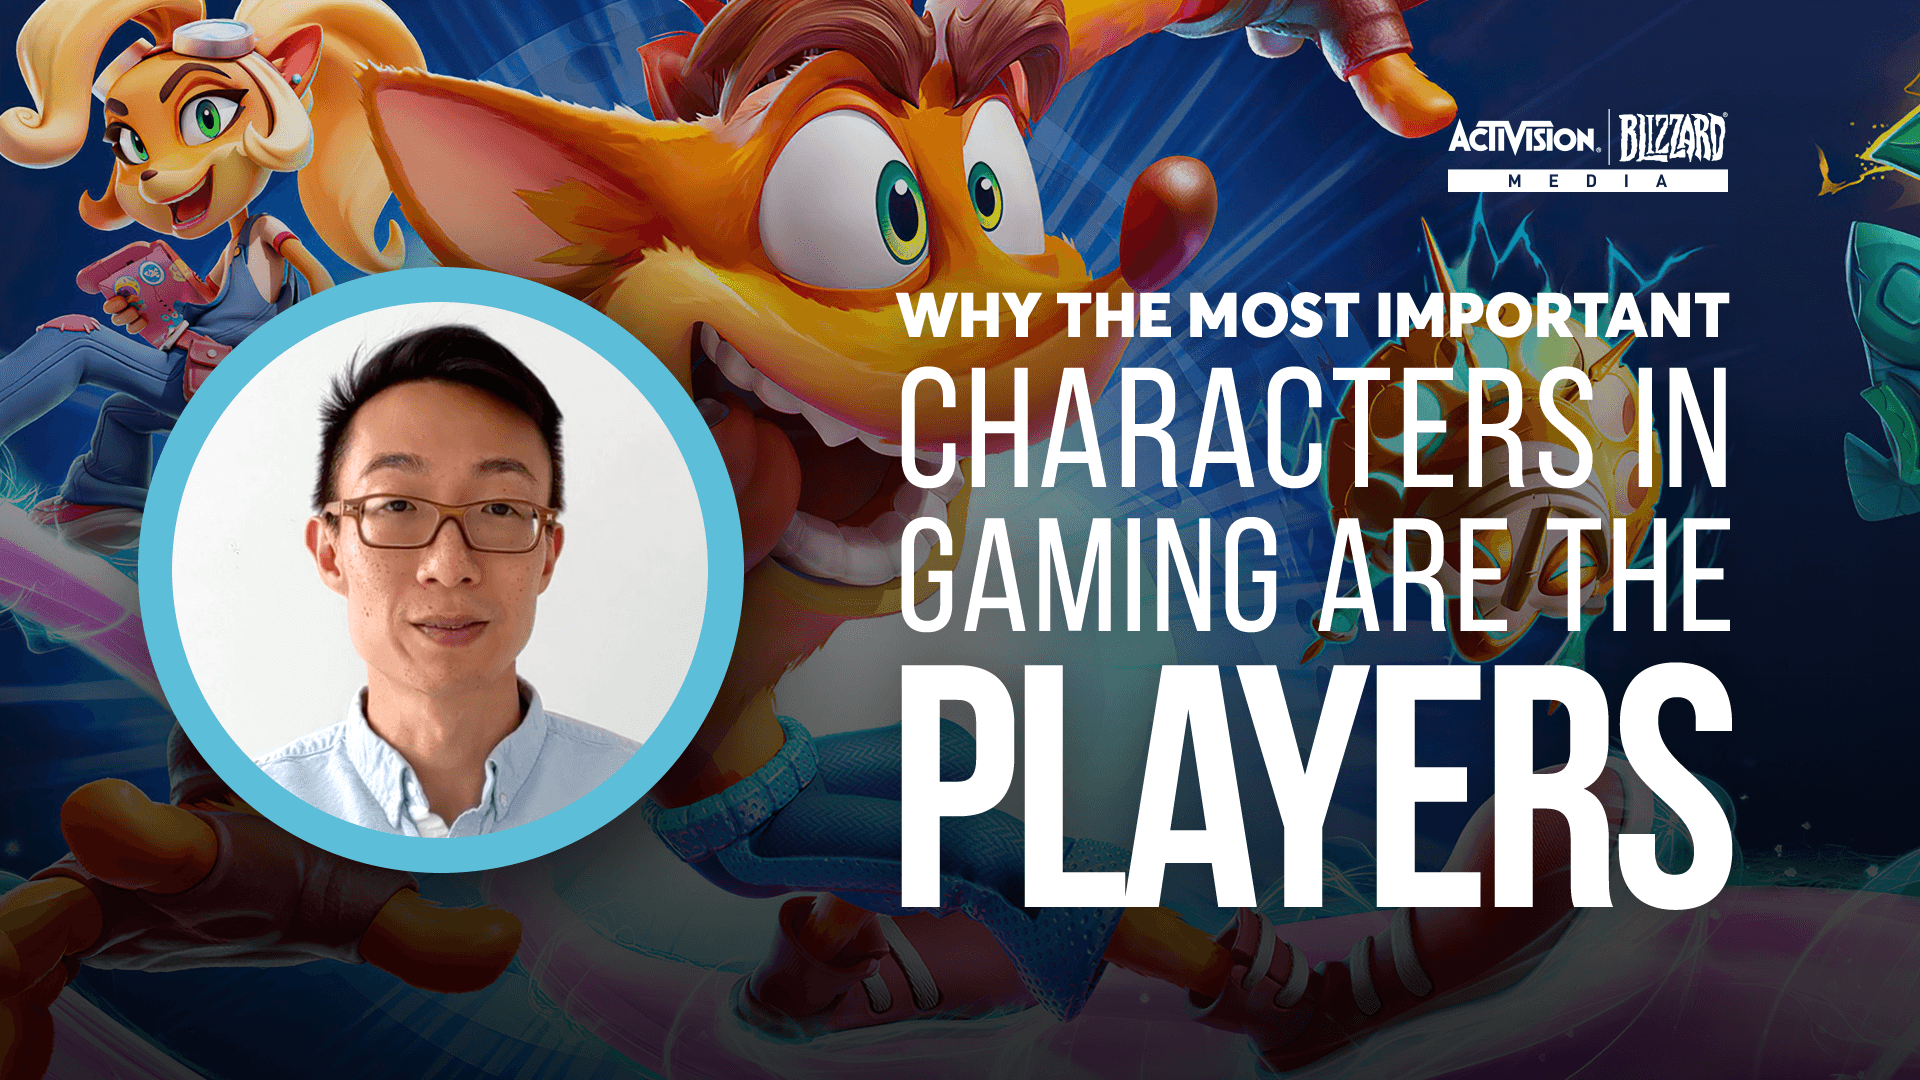 Watch video: "Why the most important characters in gaming are the players"